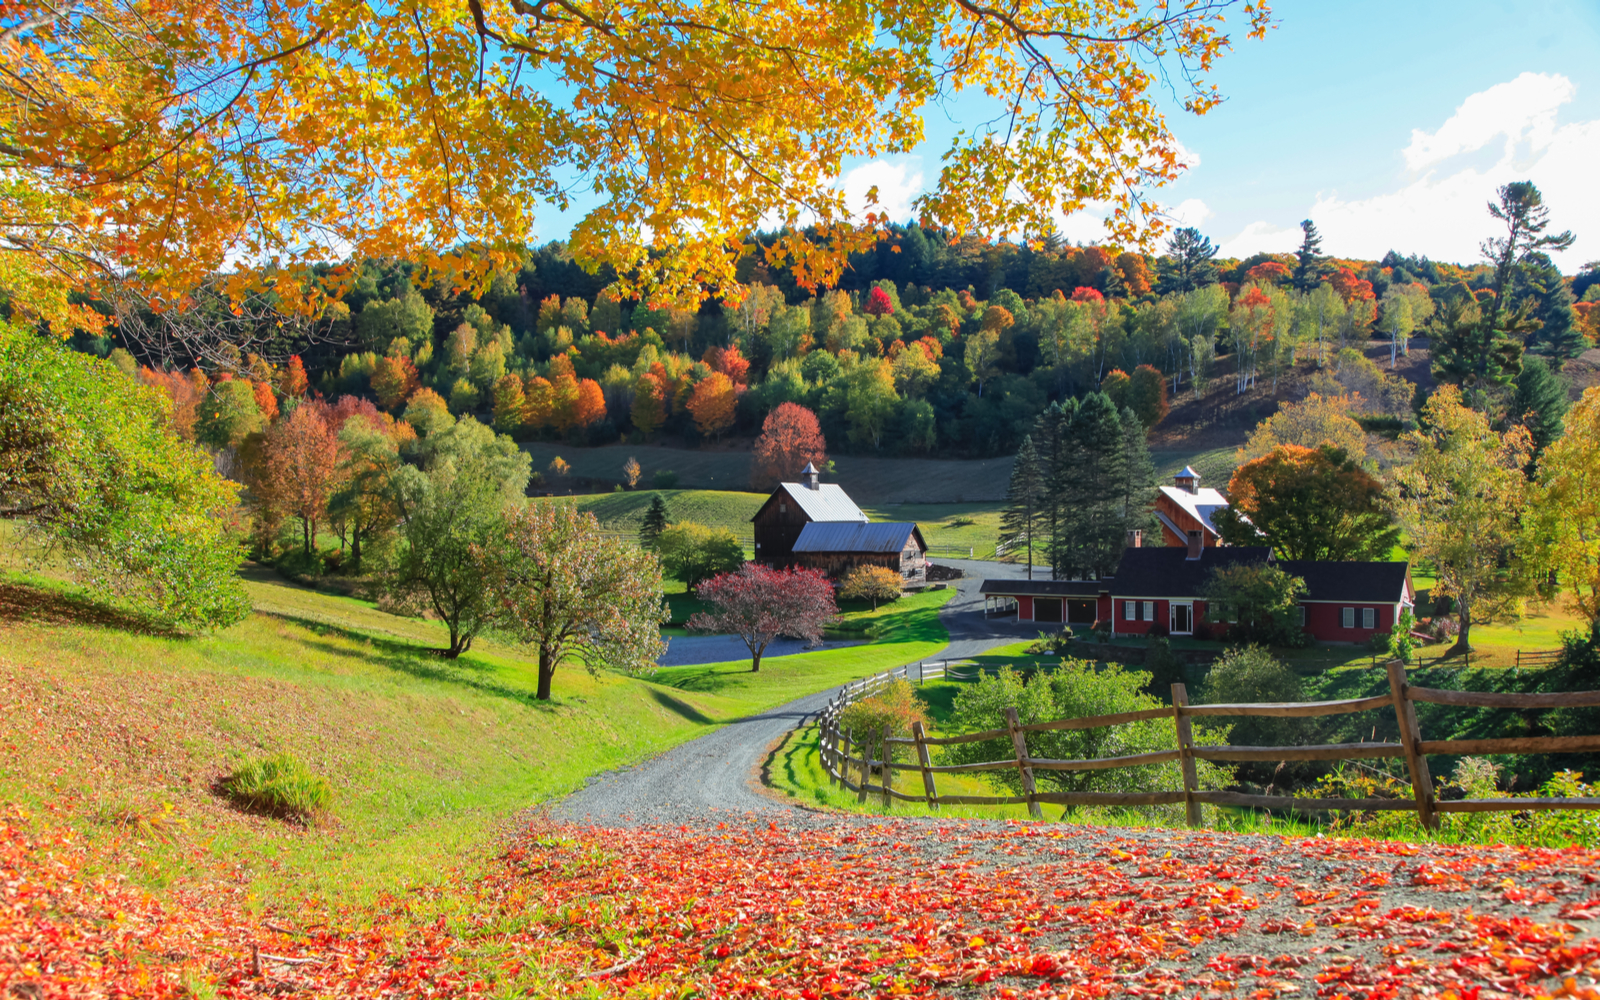 15 Best Things to Do in Vermont in 2022